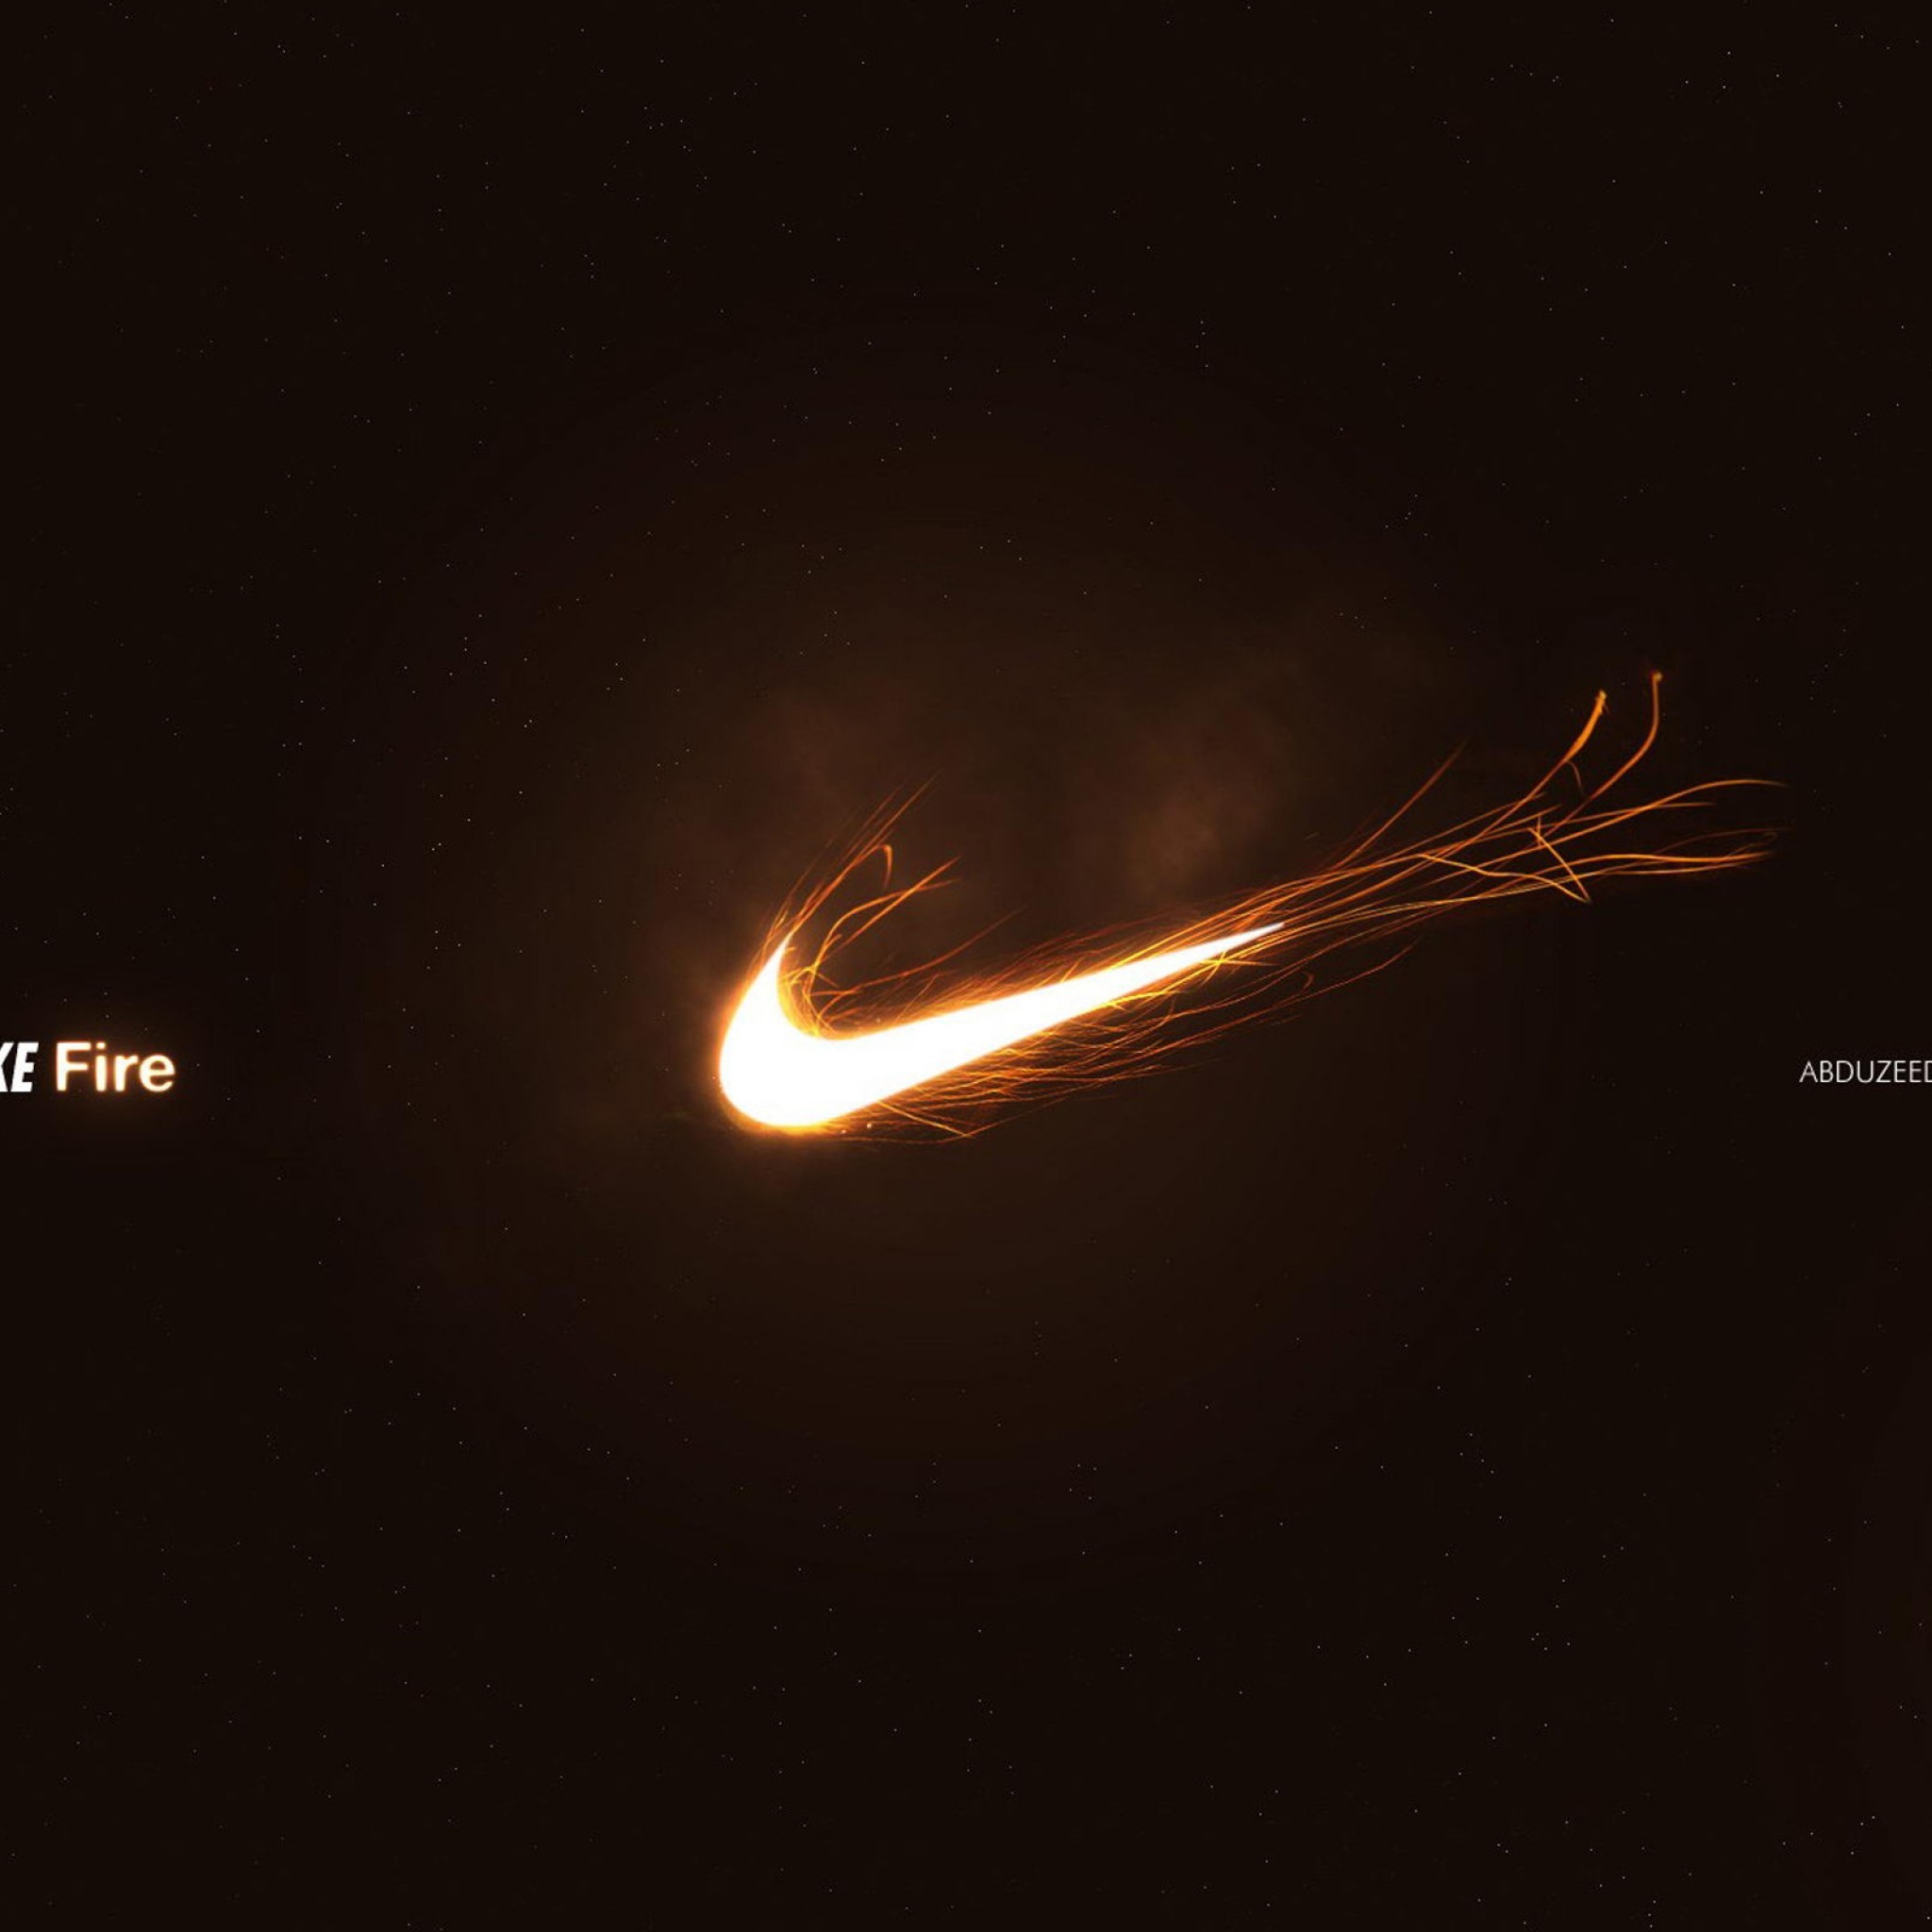 2048x2048 This is a firework that pops up and makes a nike sine